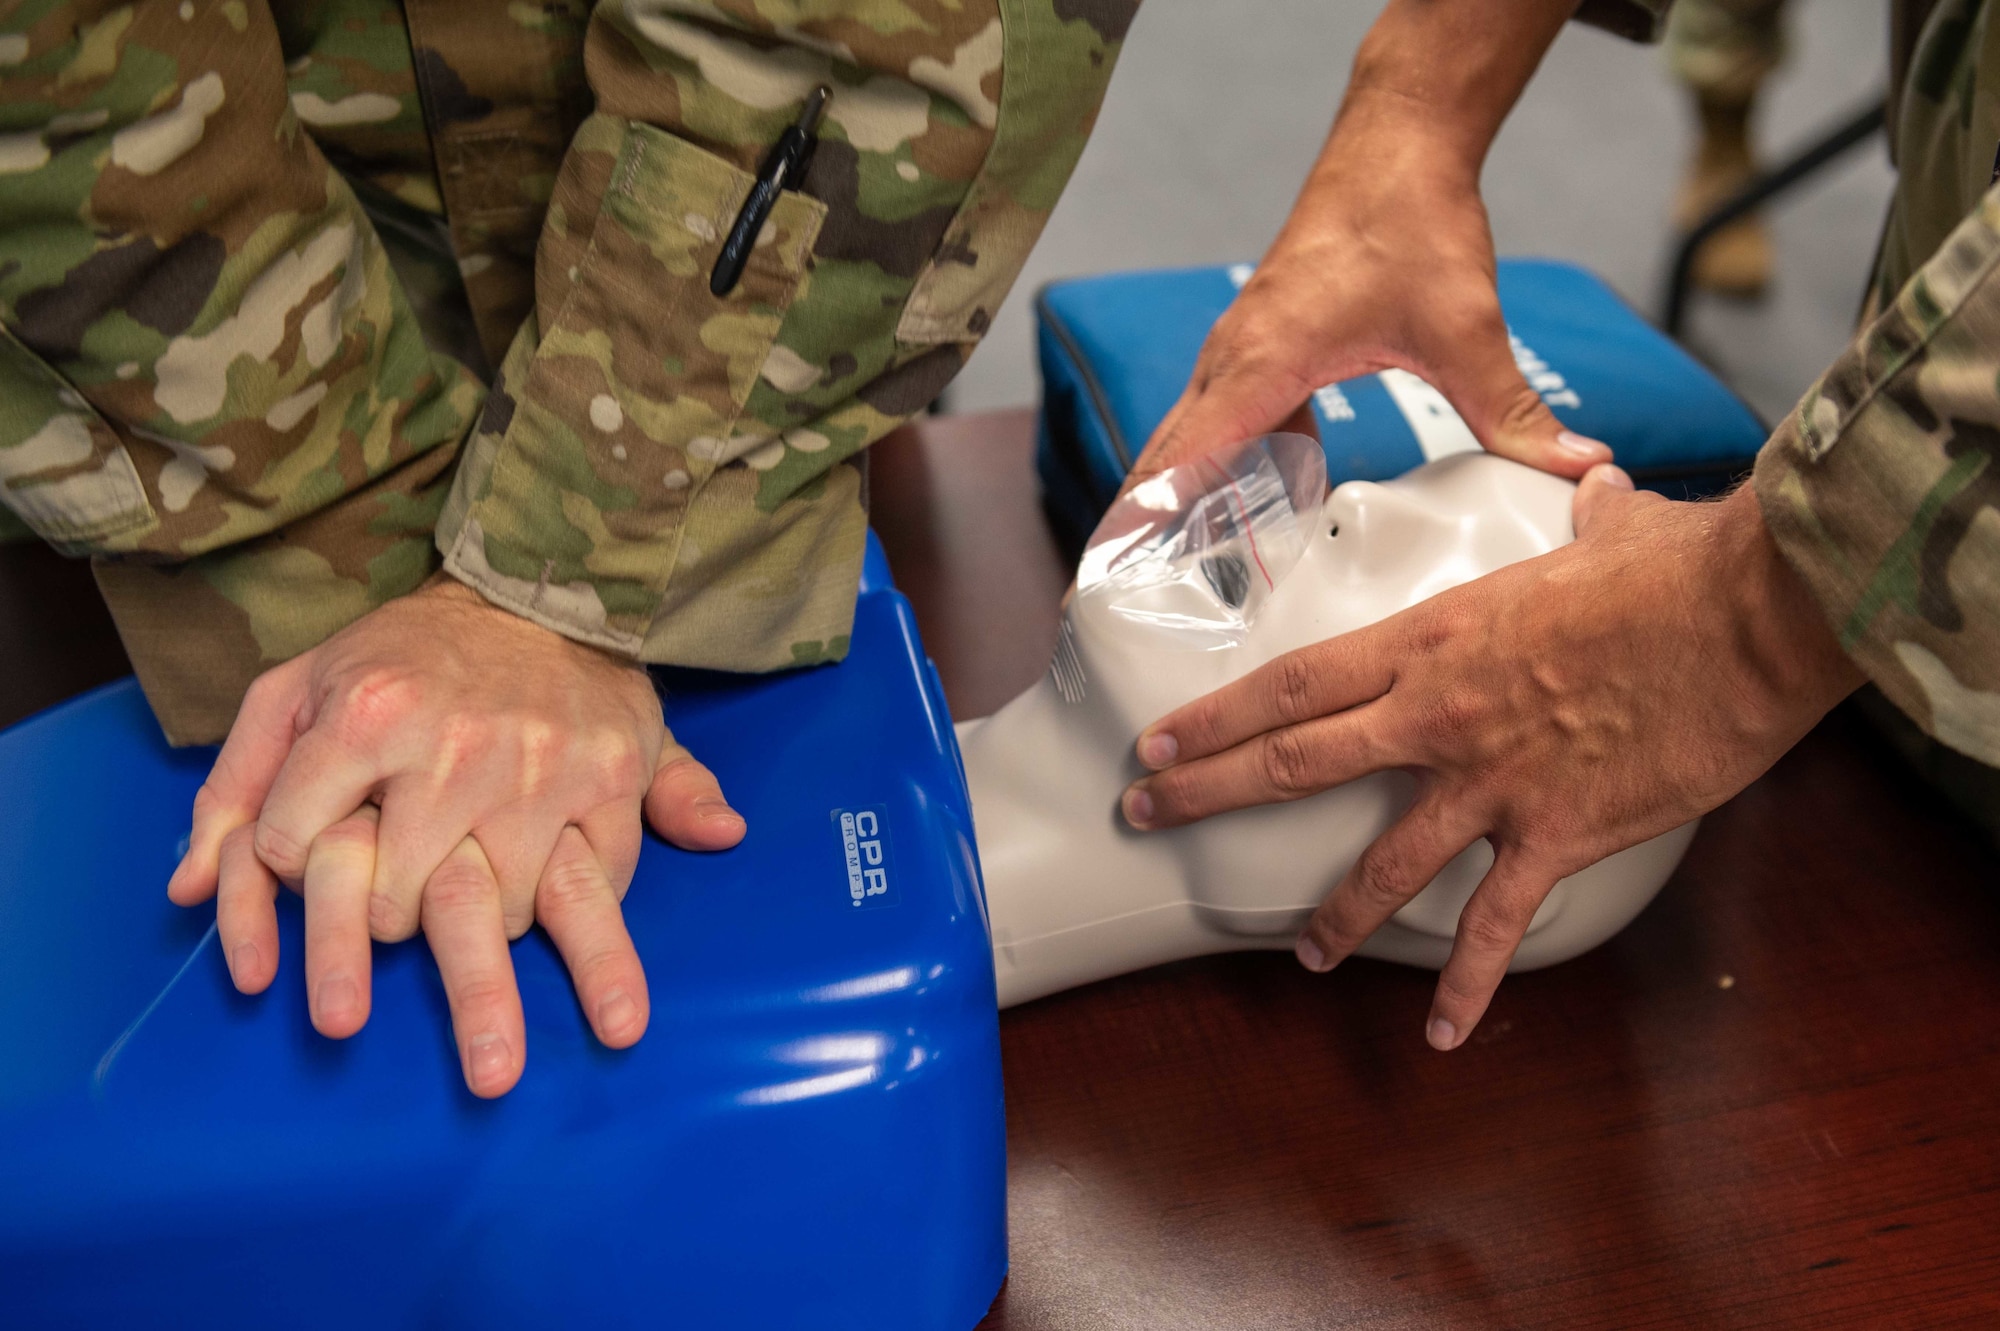 Staff Sgt. Joseph Gimino, right, 4th Security Forces Squadron patrolman, and Staff Sgt. Will Thompson, 4th SFS military working dog handler, perform chest compressions on a mannequin during a CPR class at Seymour Johnson, North Carolina, Nov. 9, 2021. Chest compressions are performed at a rate of 100 to 120 beats per minute. (U.S. Air Force photo by Airman 1st Class Sabrina Fuller)